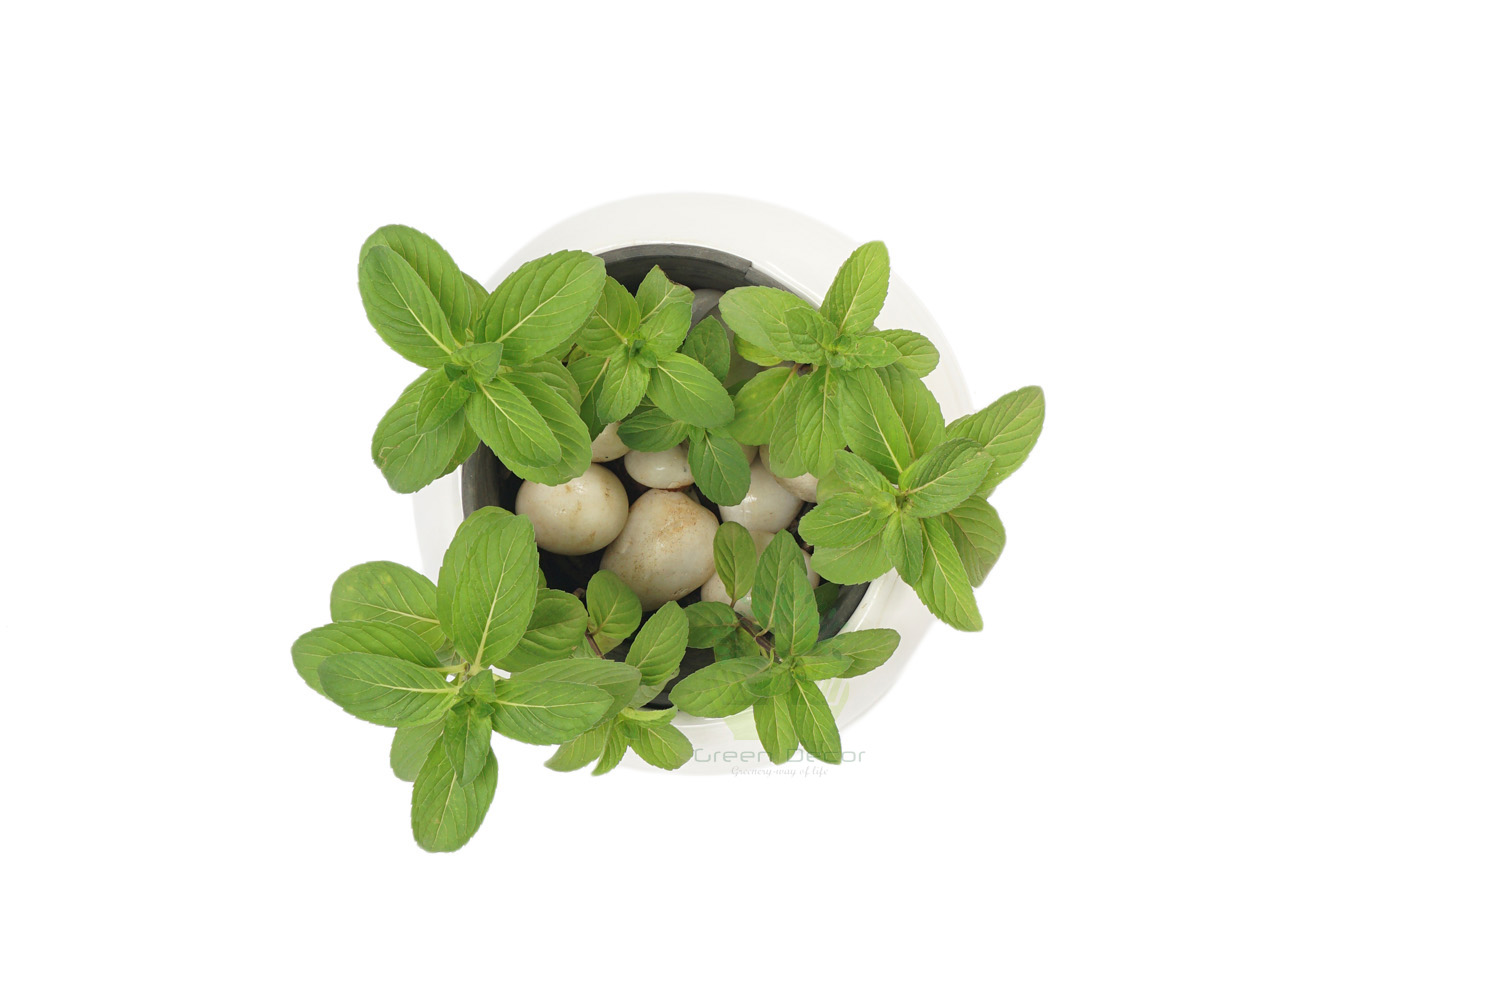 Buy Lemon Balm Plants , White Pots and seeds in Delhi NCR by the best online nursery shop Greendecor.